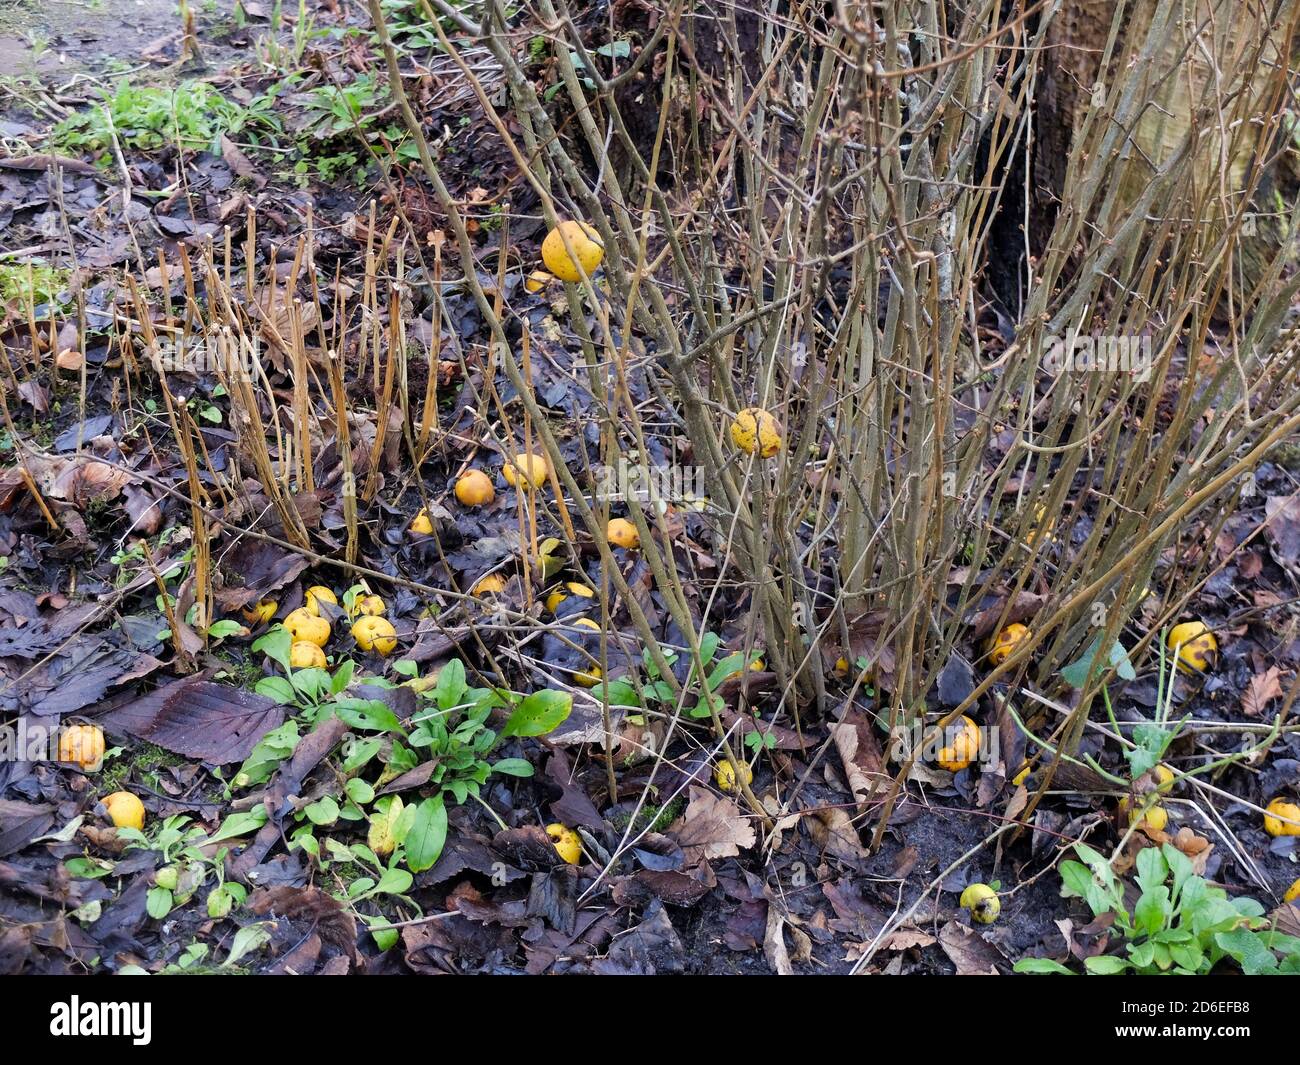 Fruits of the Japanese quince (Chaenomeles japonica) used as fallen fruit in winter Stock Photo